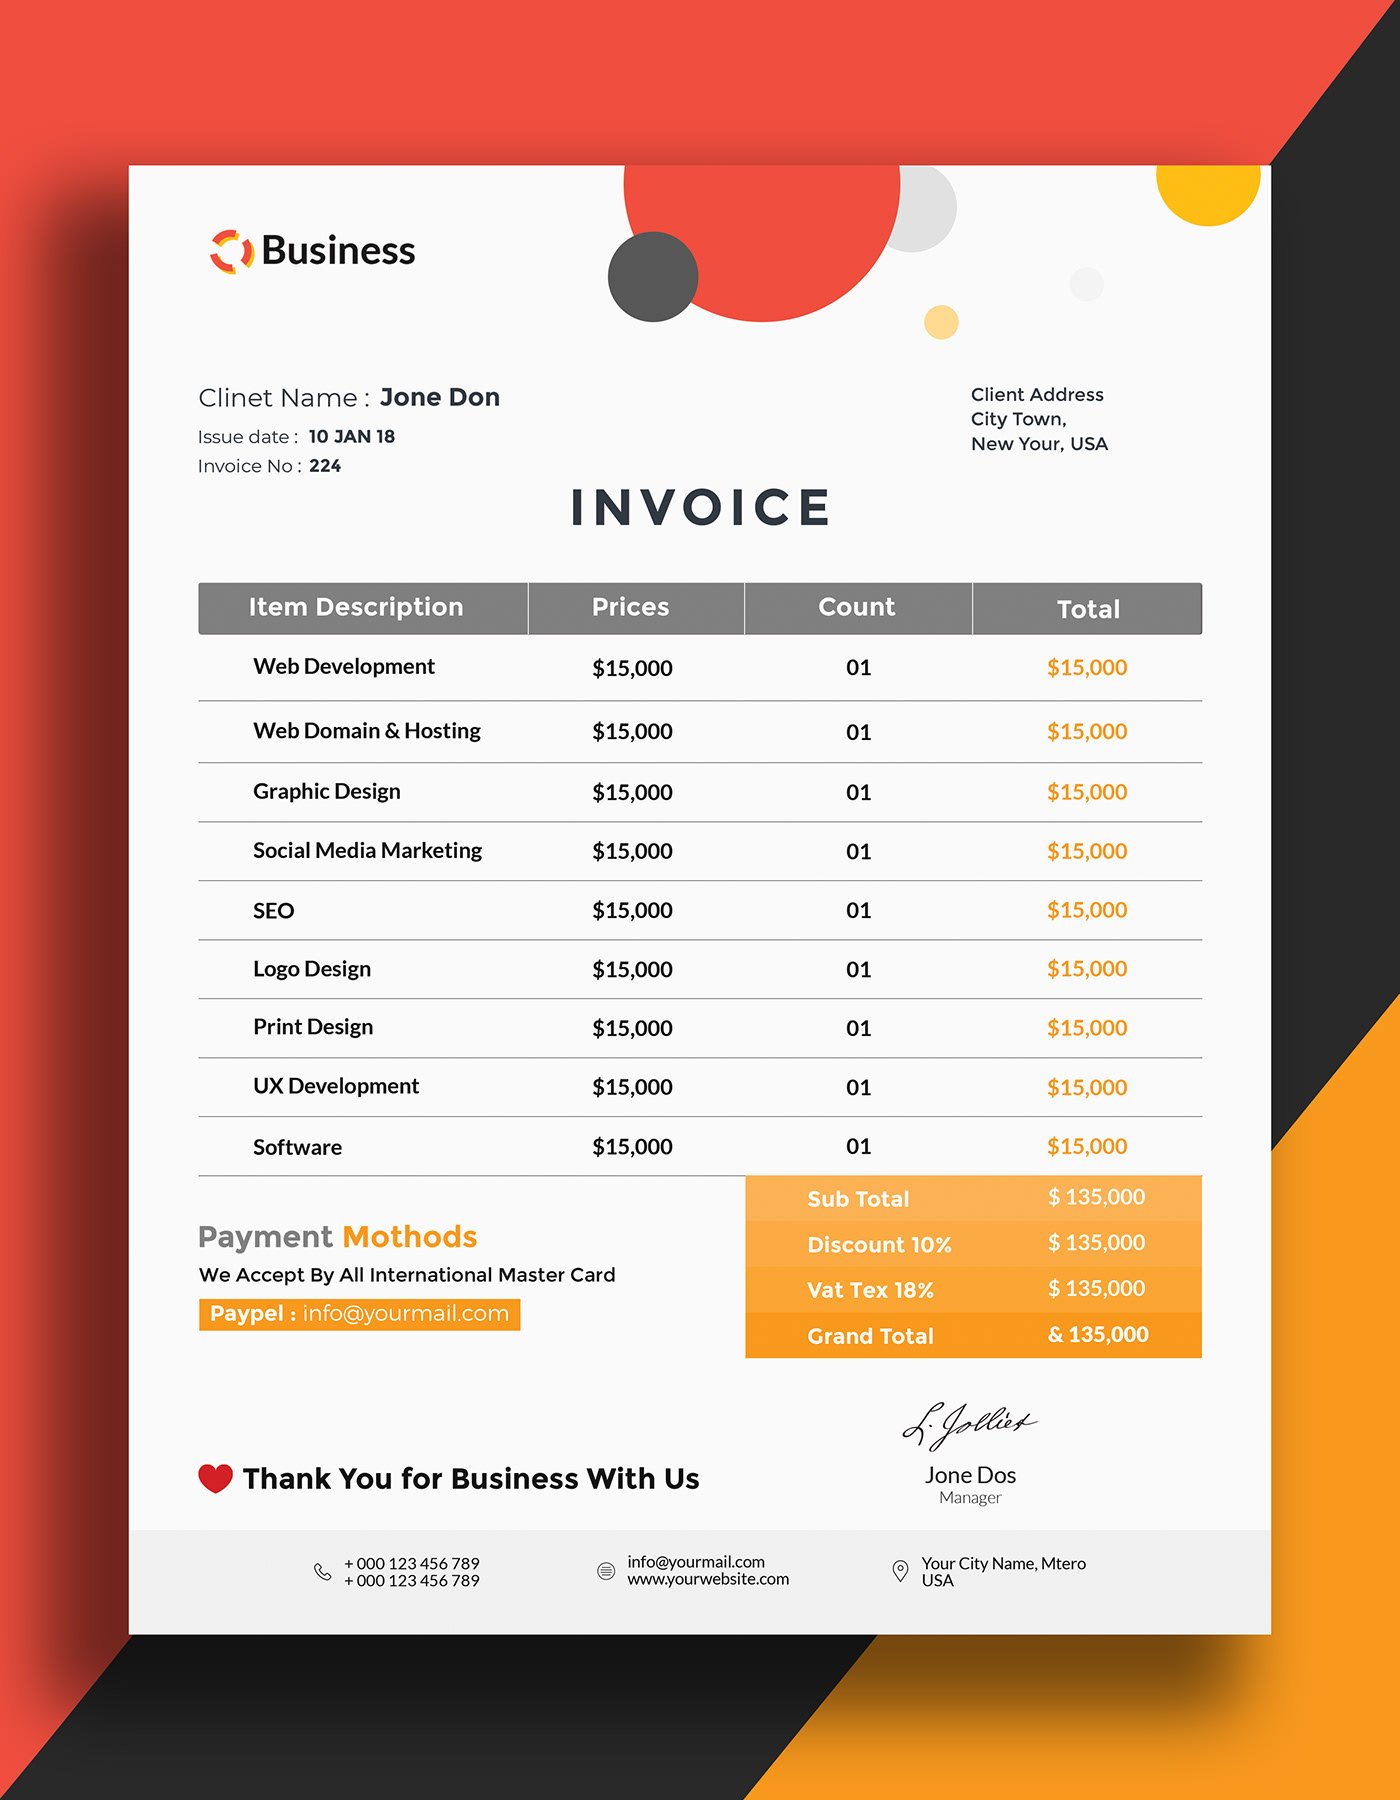 Create invoices that are clear and simple to understand.